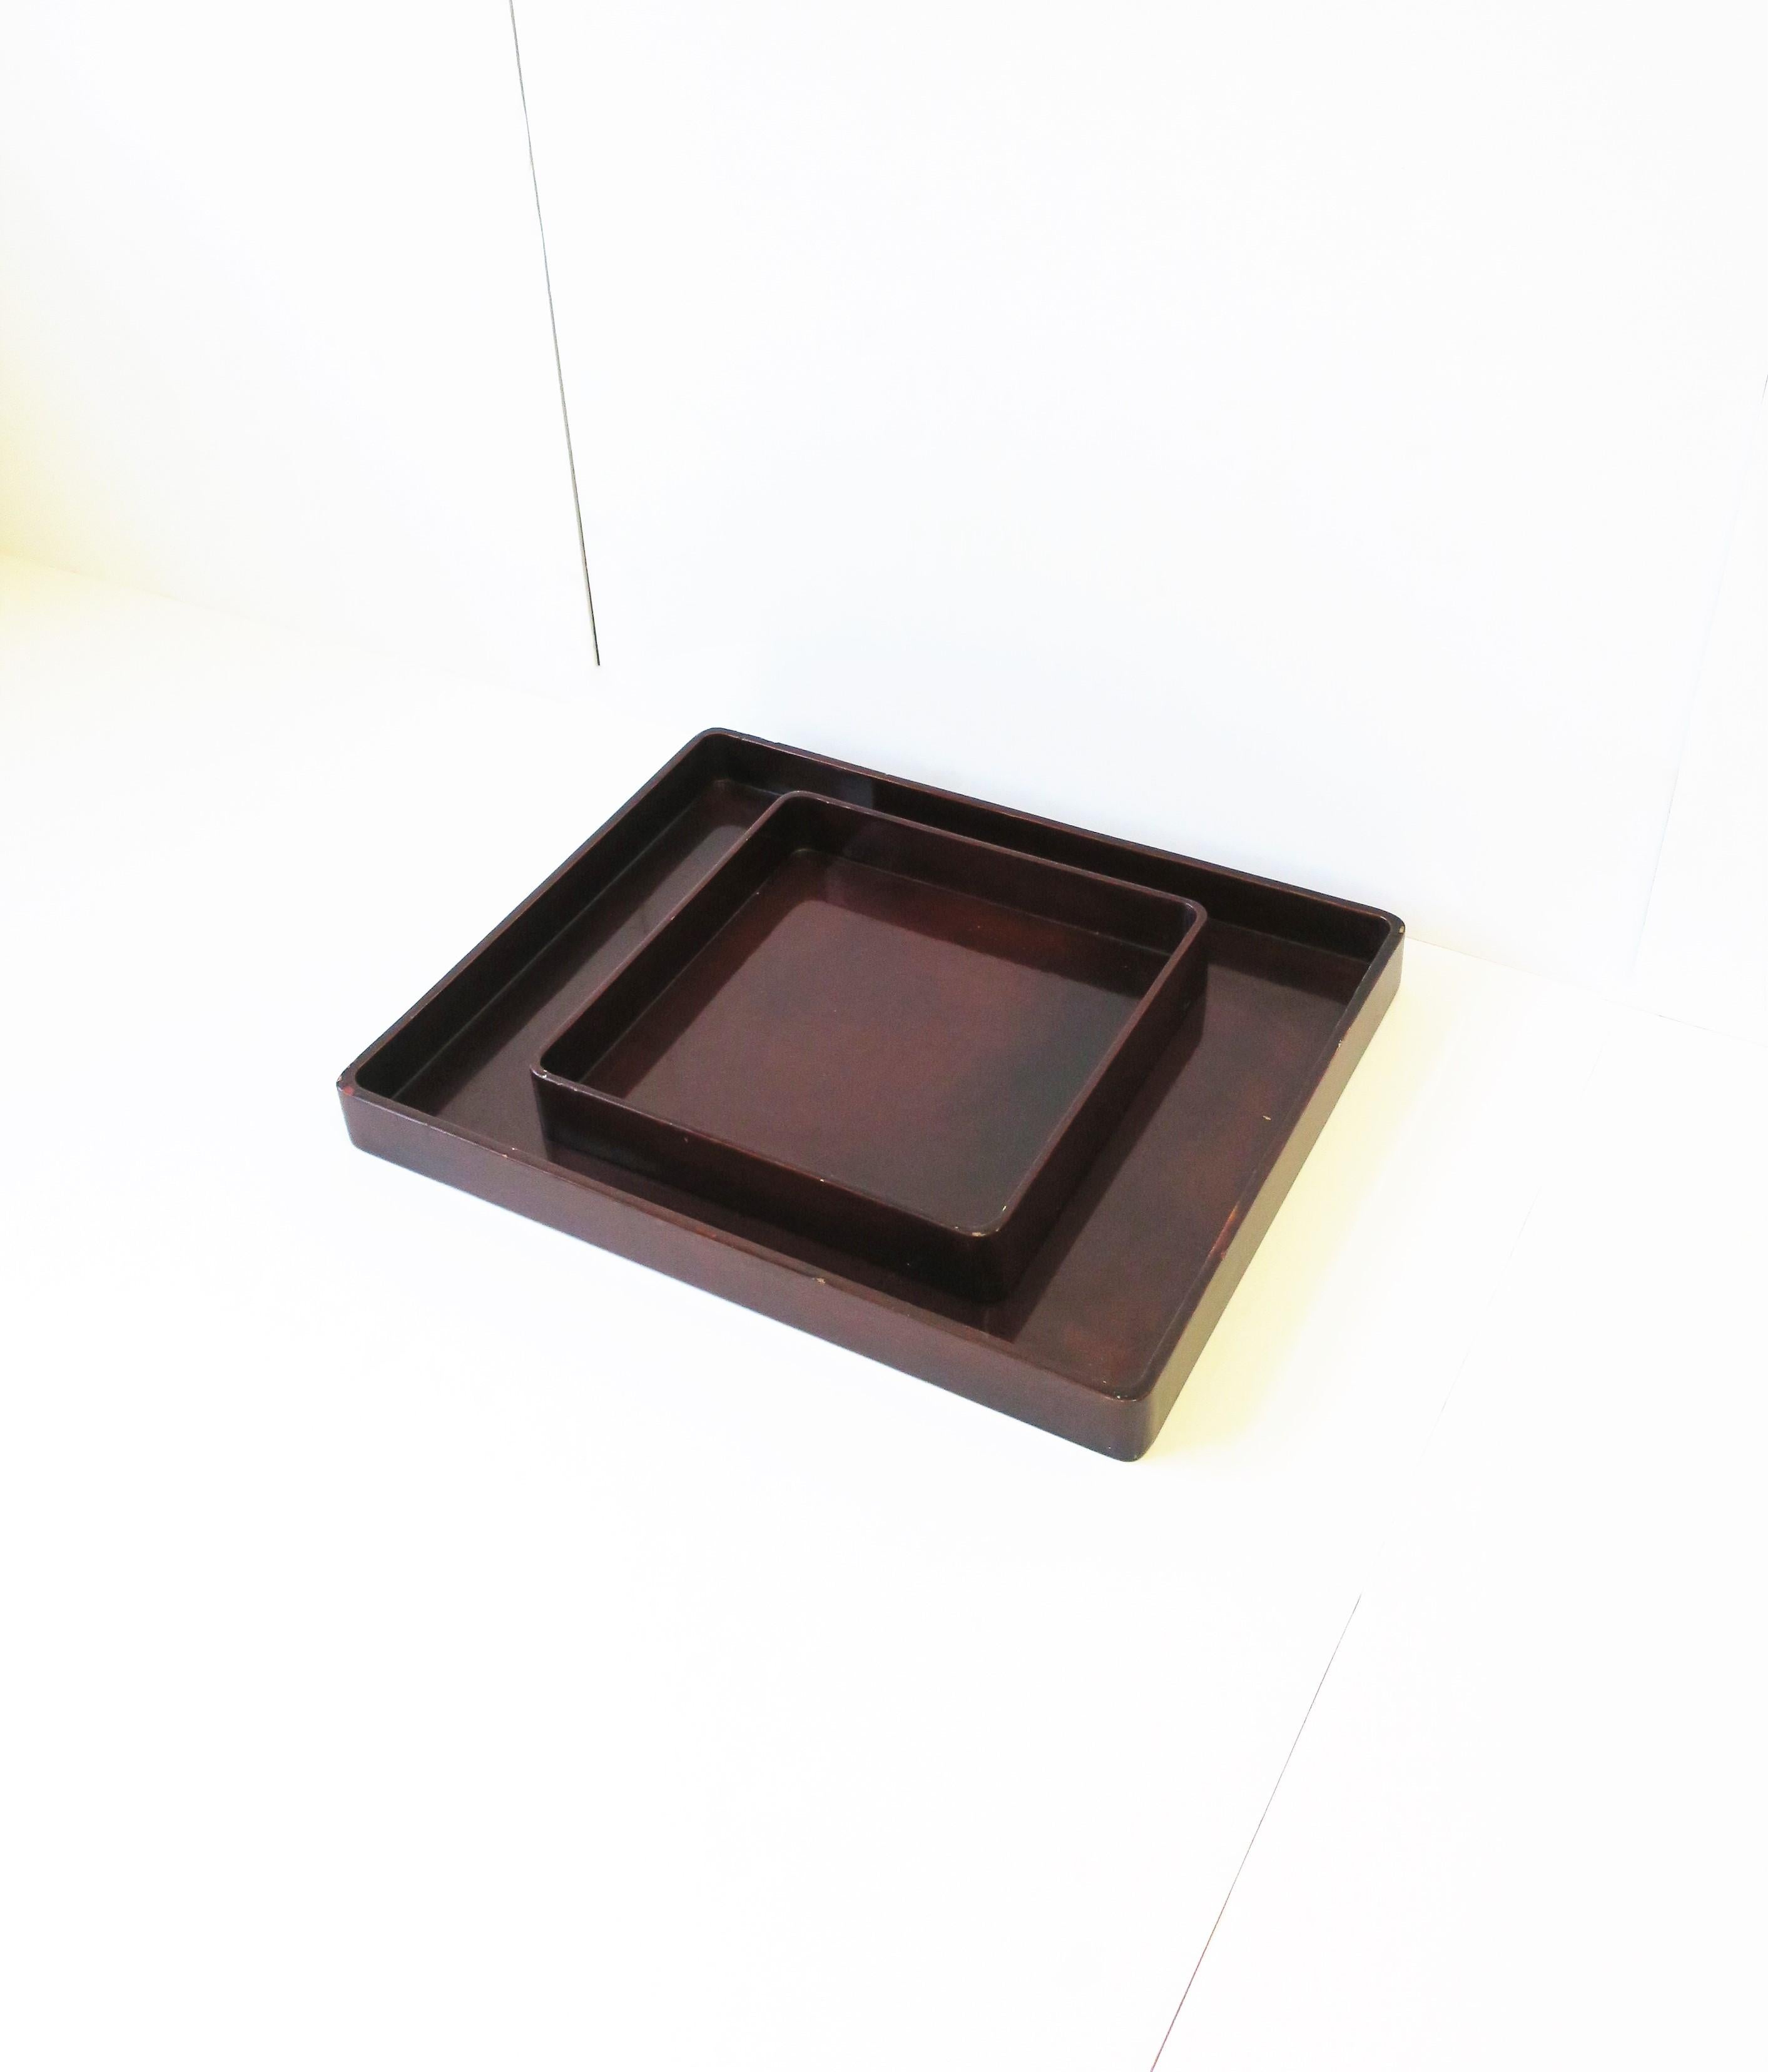 A chic dark red burgundy rectangular lacquer serving tray by designer Rae Kasian, in the modern style, circa late-20th century. With maker's mark on bottom as shown in images #19 and 20. 

Dimensions: 1.63